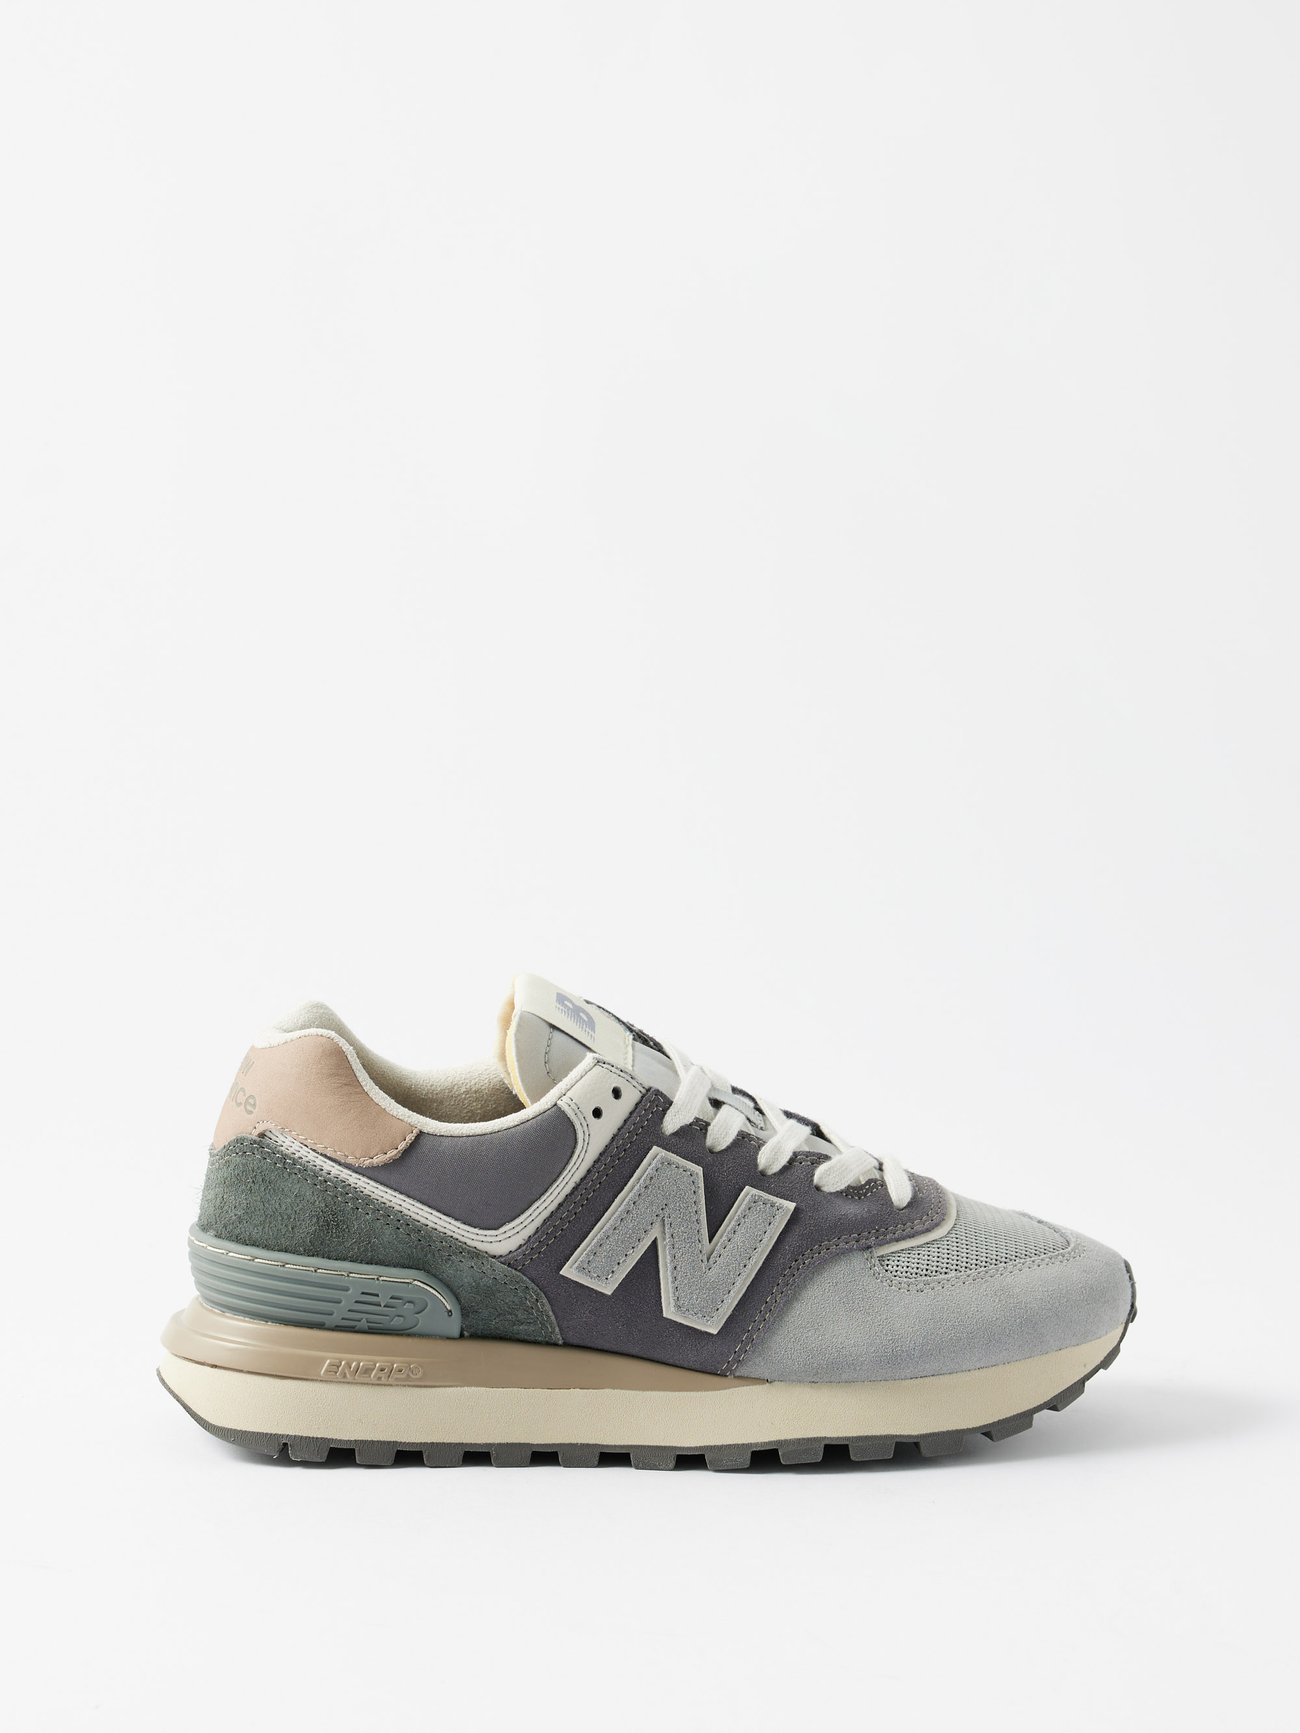 Grey 574 suede, leather and mesh trainers | New Balance | MATCHESFASHION UK